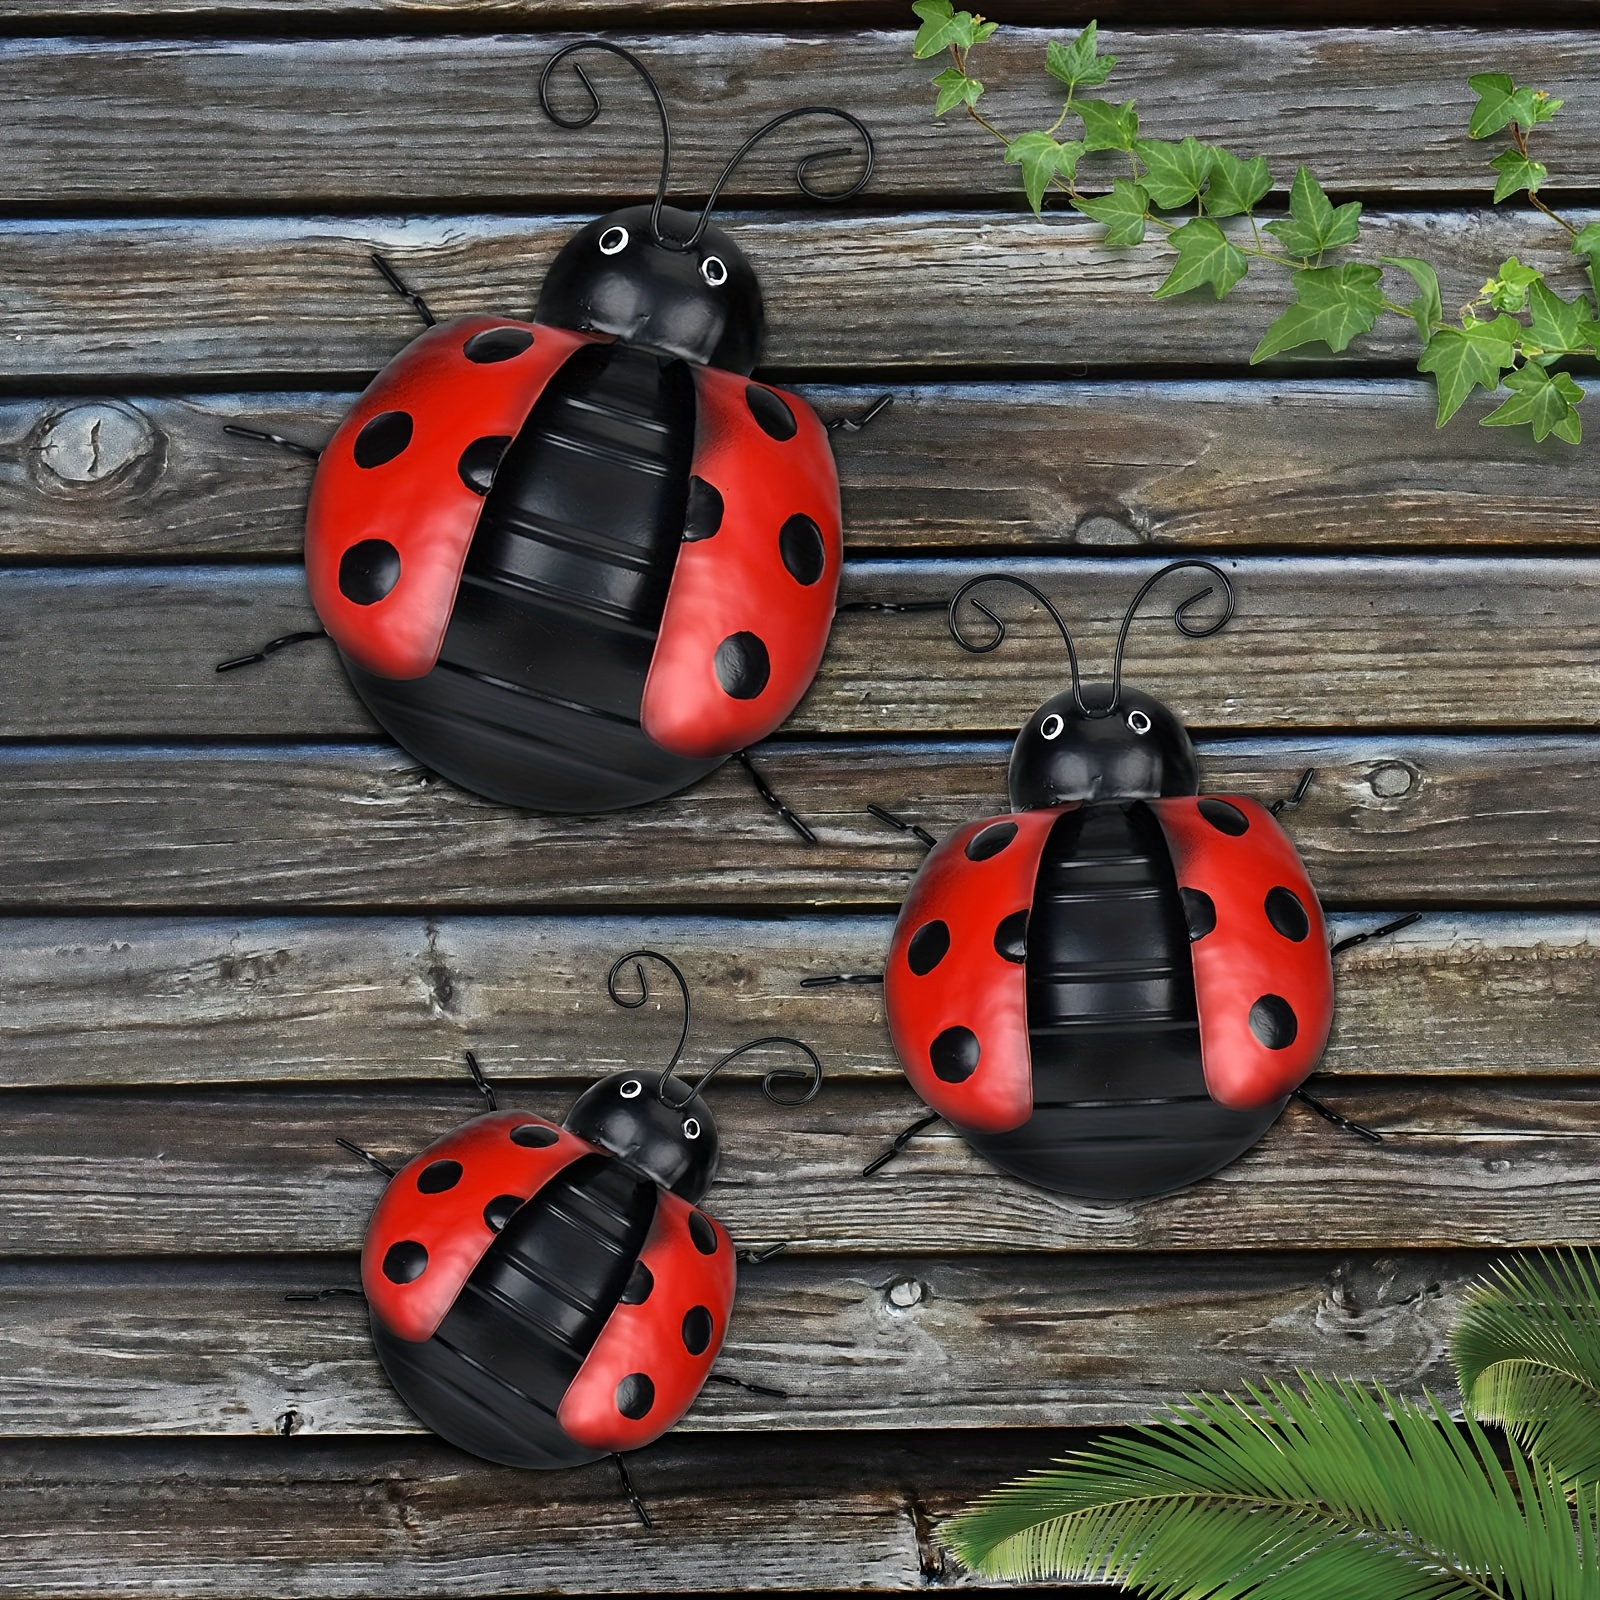 

3pcs/set Metal Cute Ladybug Sculpture Wall Art Decor, Indoor Outdoor Decorative, Red Ladybirds Hanging For Garden Backyard Porch Home Patio Lawn Fence Decorations, Creative Holiday Decorations